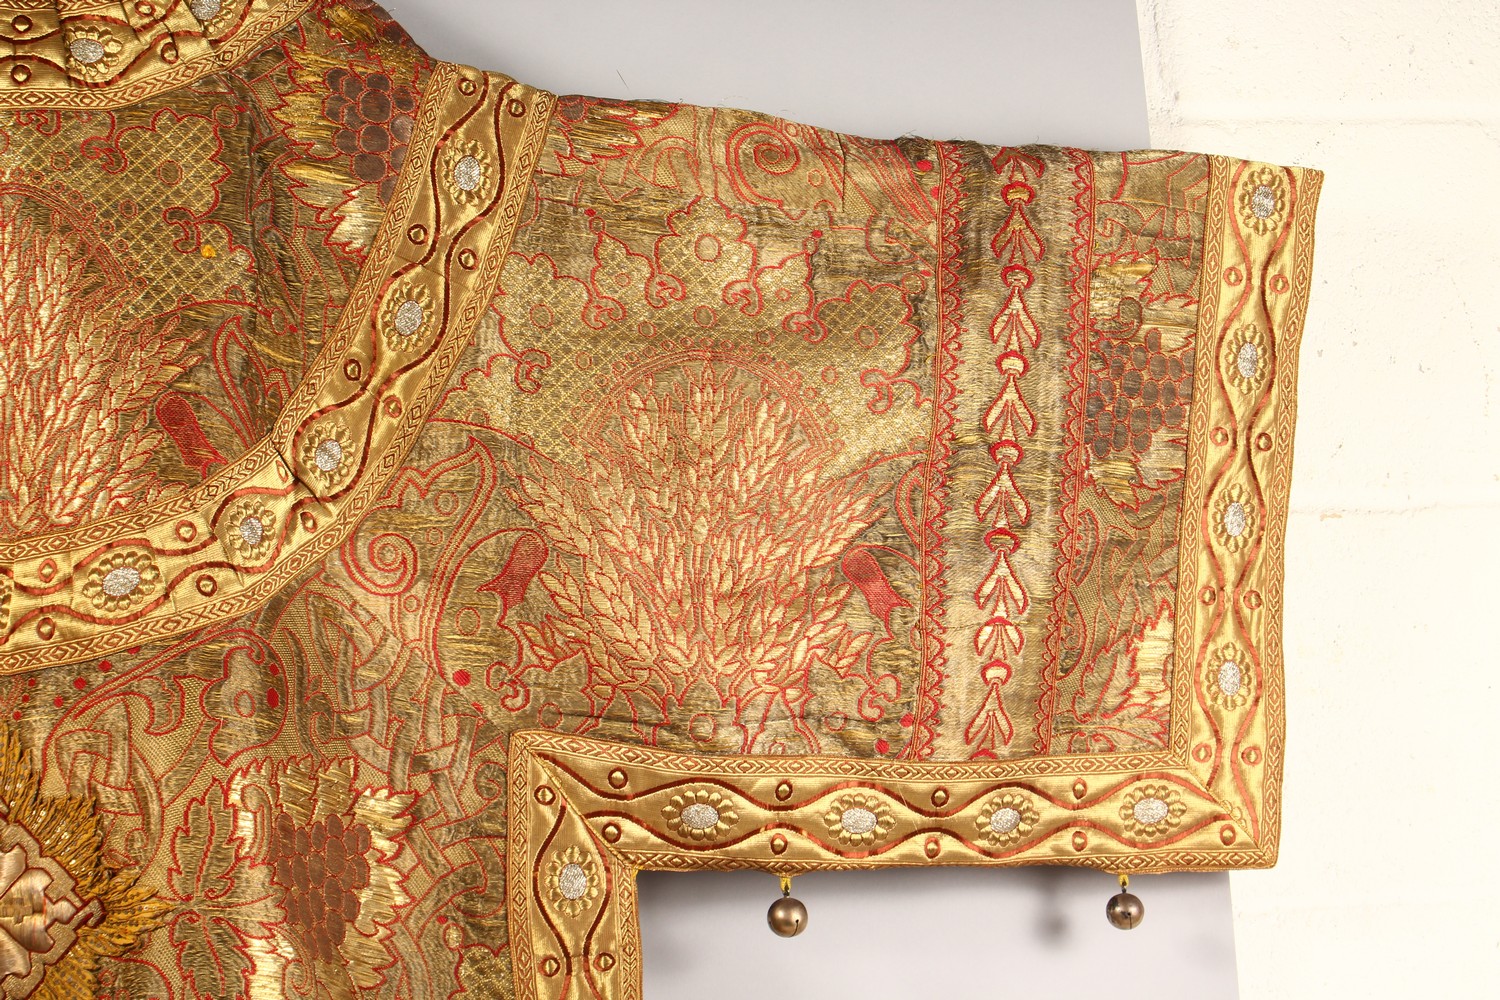 AN UNUSUAL EARLY 20TH CENTURY RUSSIAN COAT, with highly ornate gold thread embroidered decoration, - Image 13 of 22